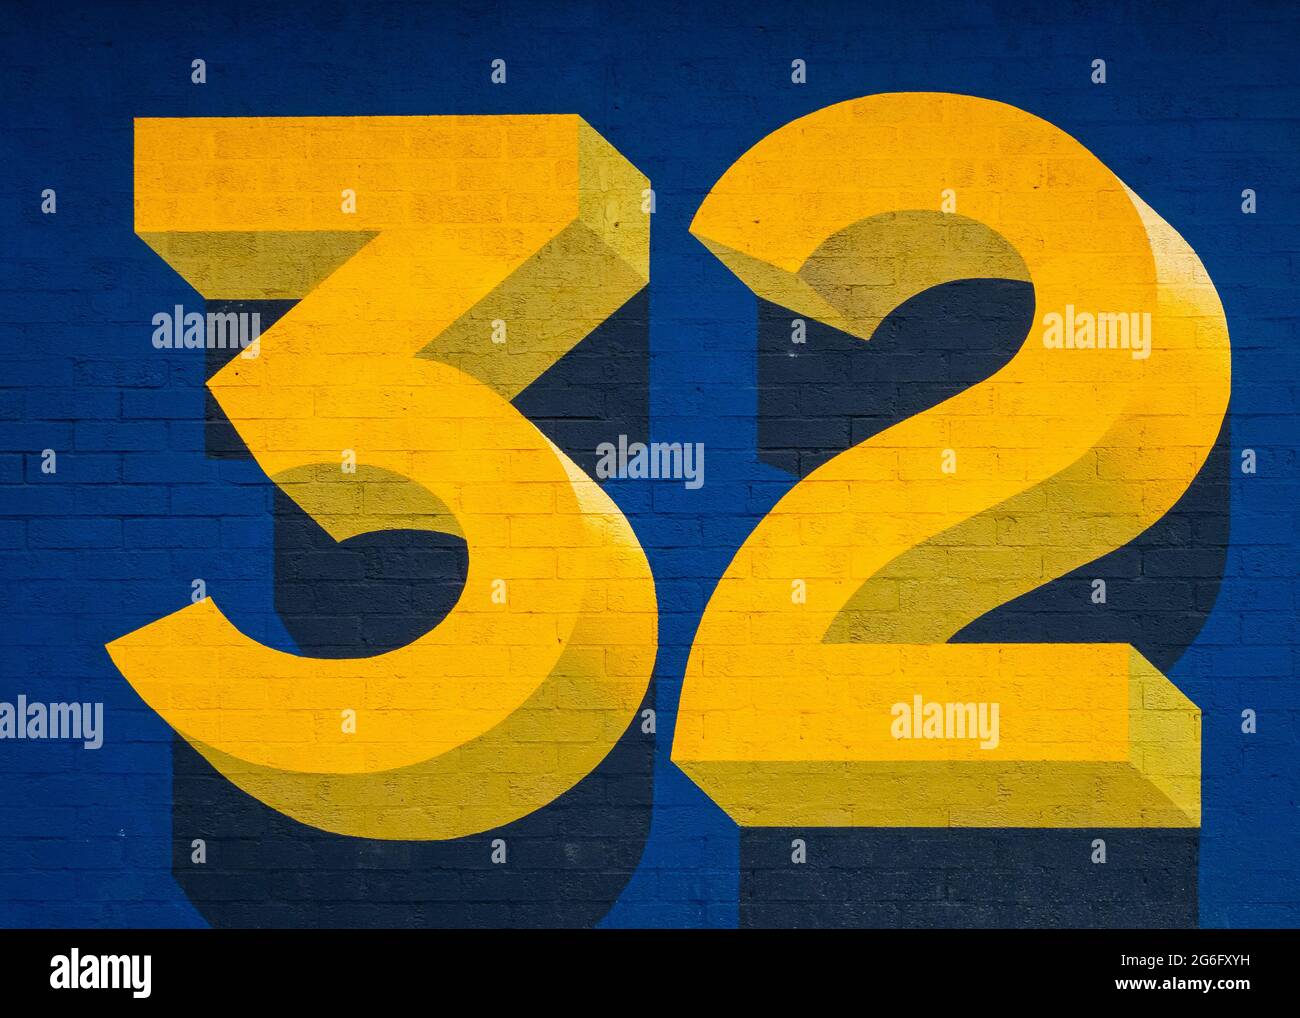 Big bright yellow three dimensional number thirty two on blue background. 32 numerals in 3d three and two. Brick texture. Stock Photo